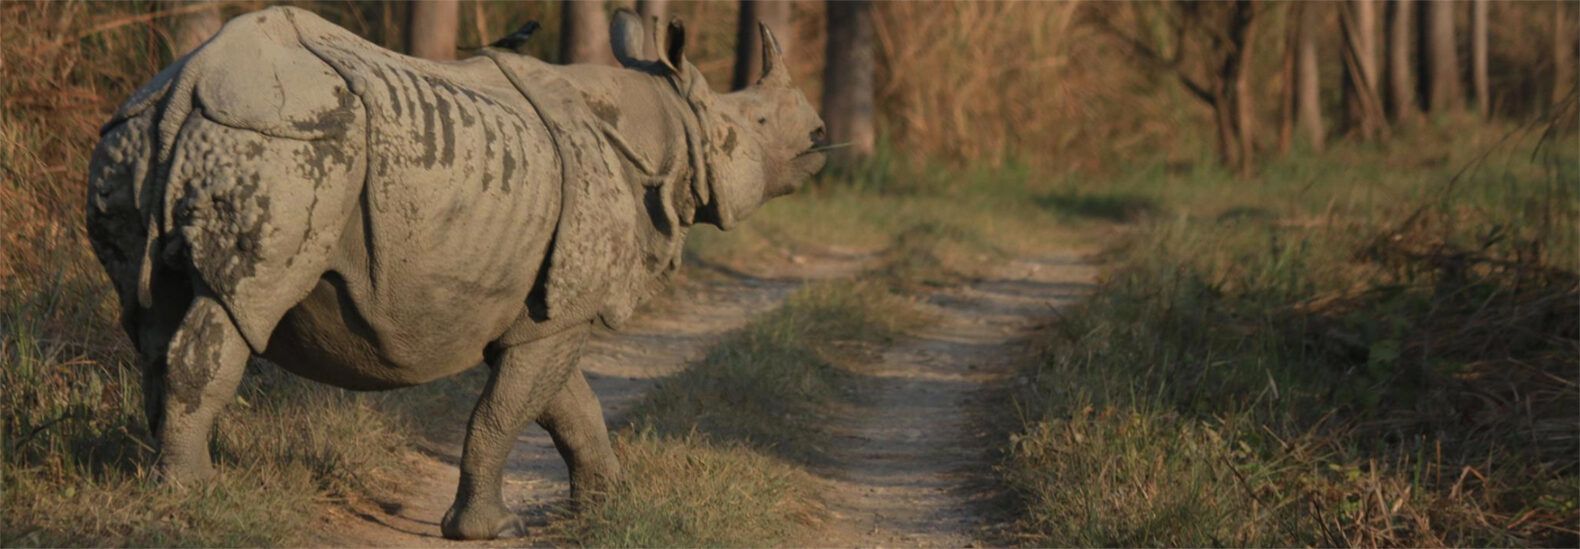 Nepal’s rhino population is on the rise